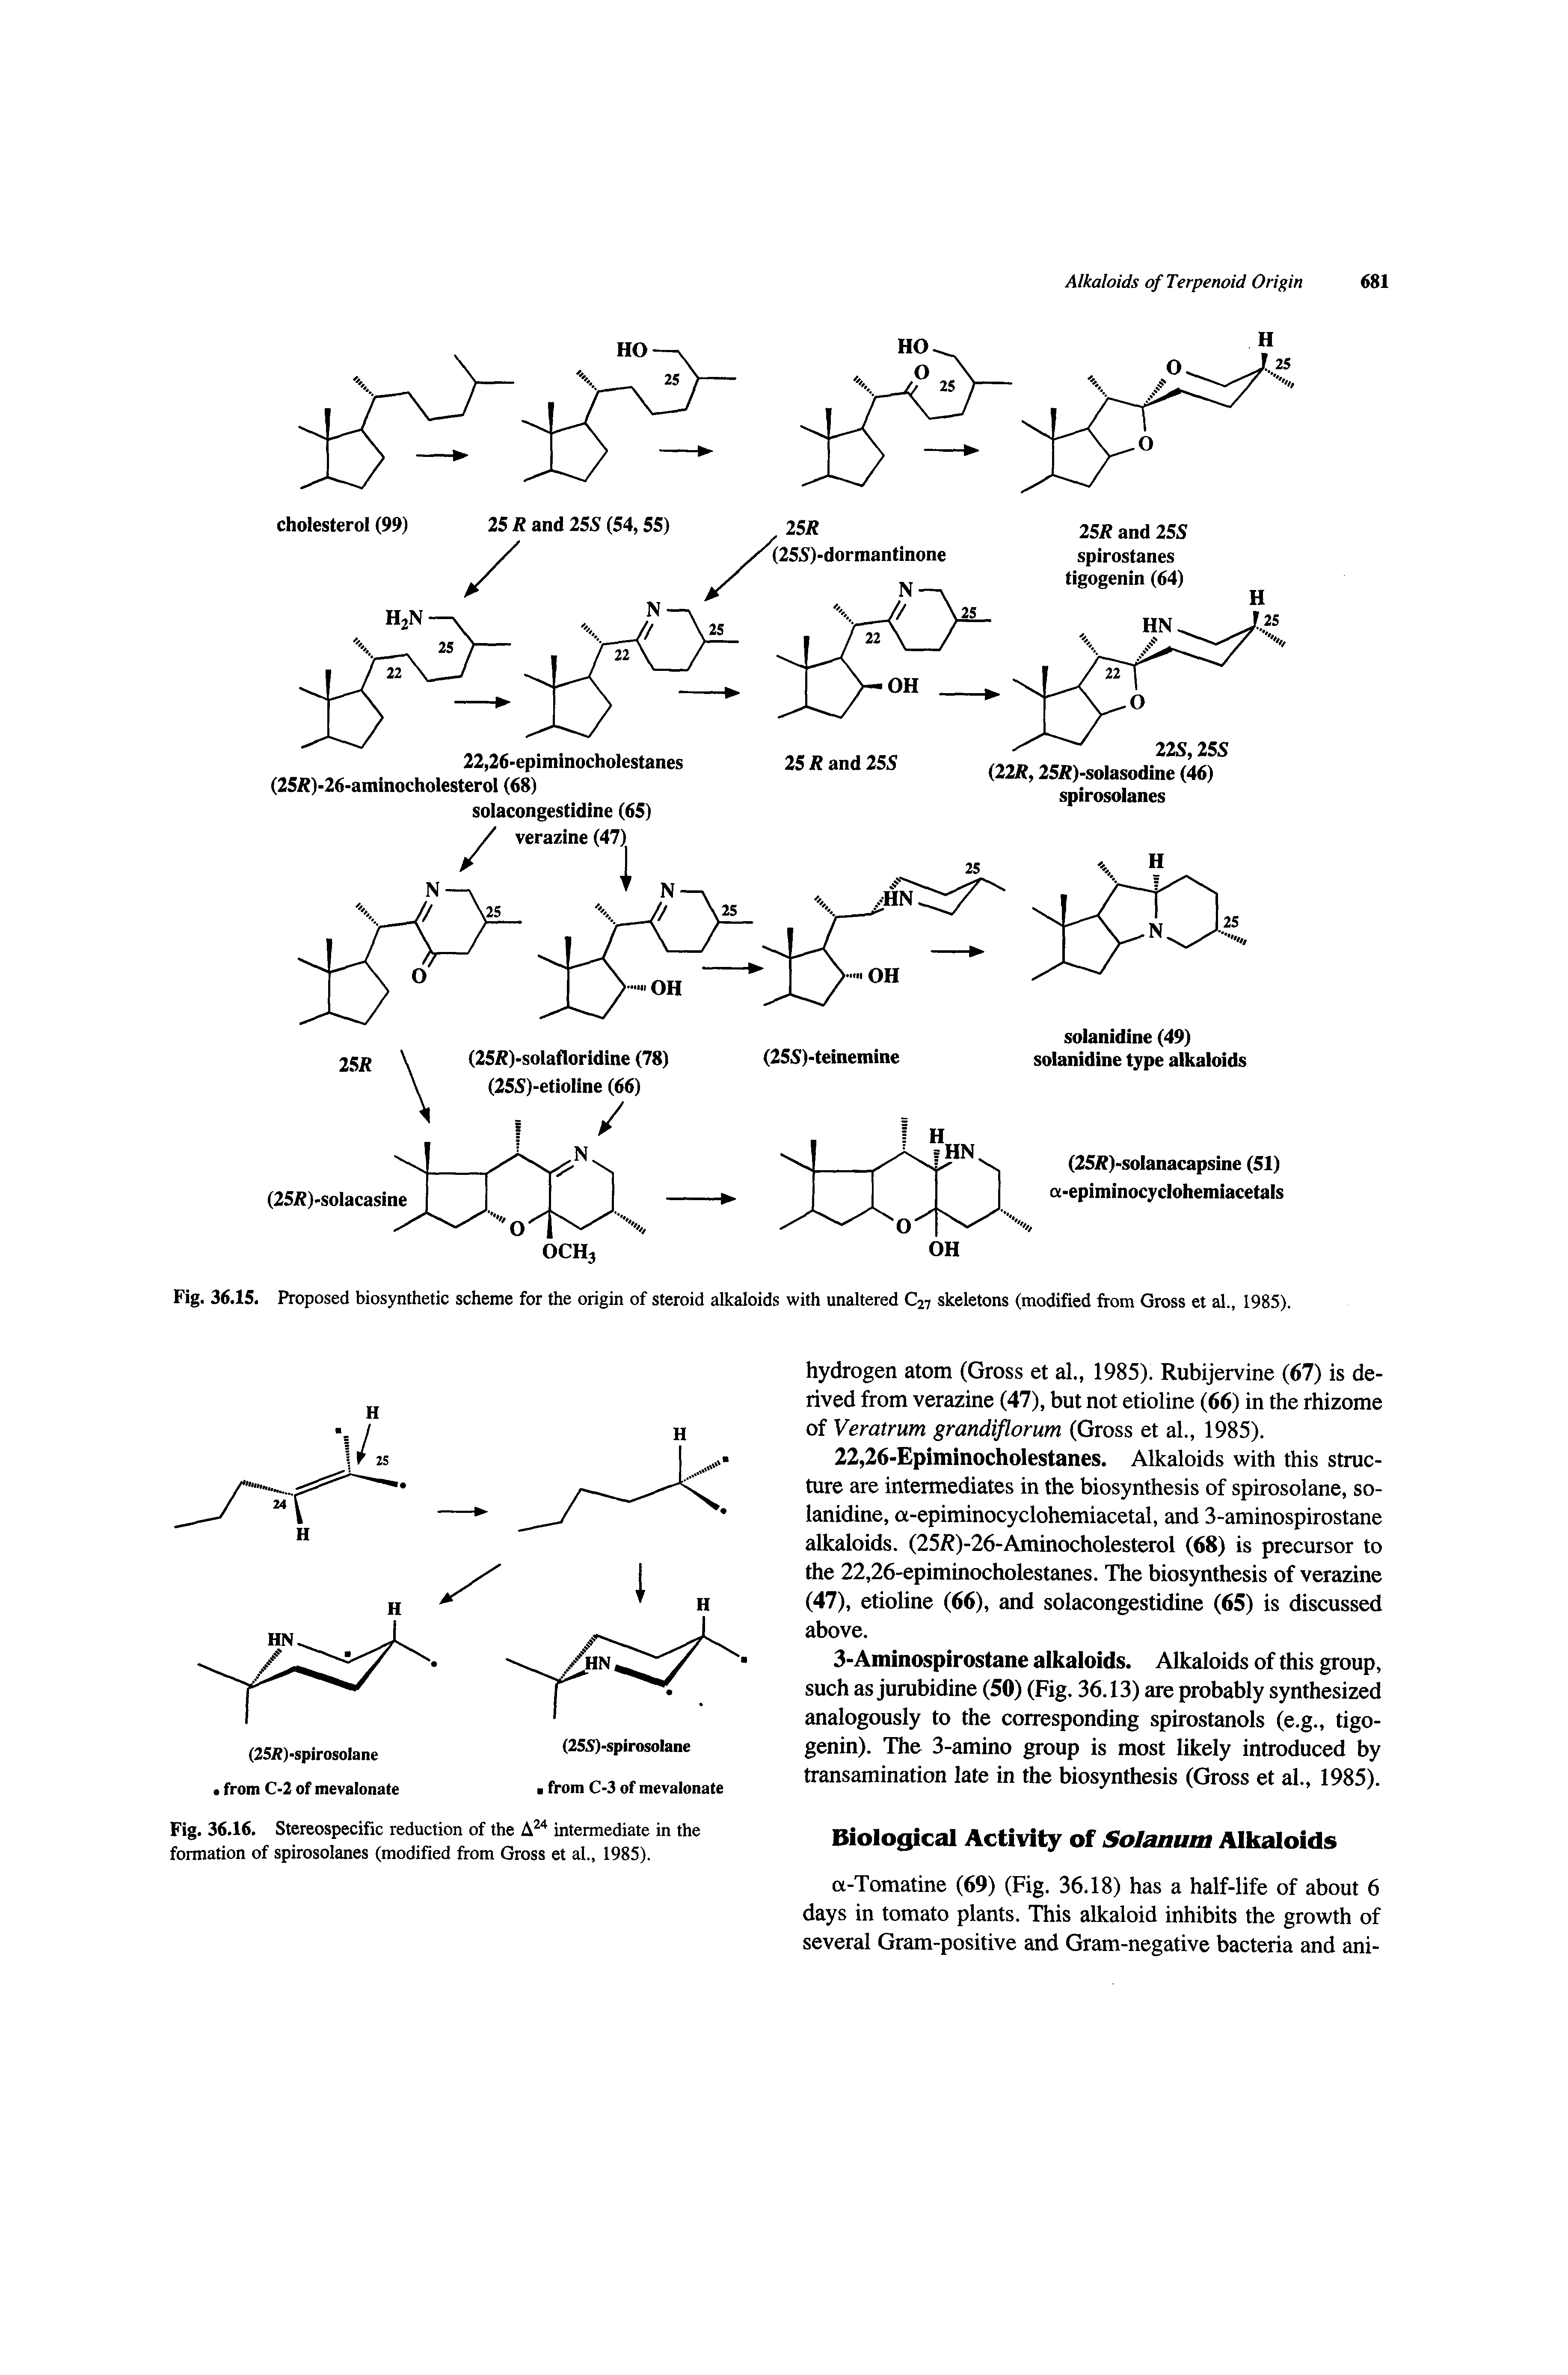 Fig. 36.15. Proposed biosynthetic scheme for the origin of steroid alkaloids with unaltered C27 skeletons (modified from Gross et al., 1985).